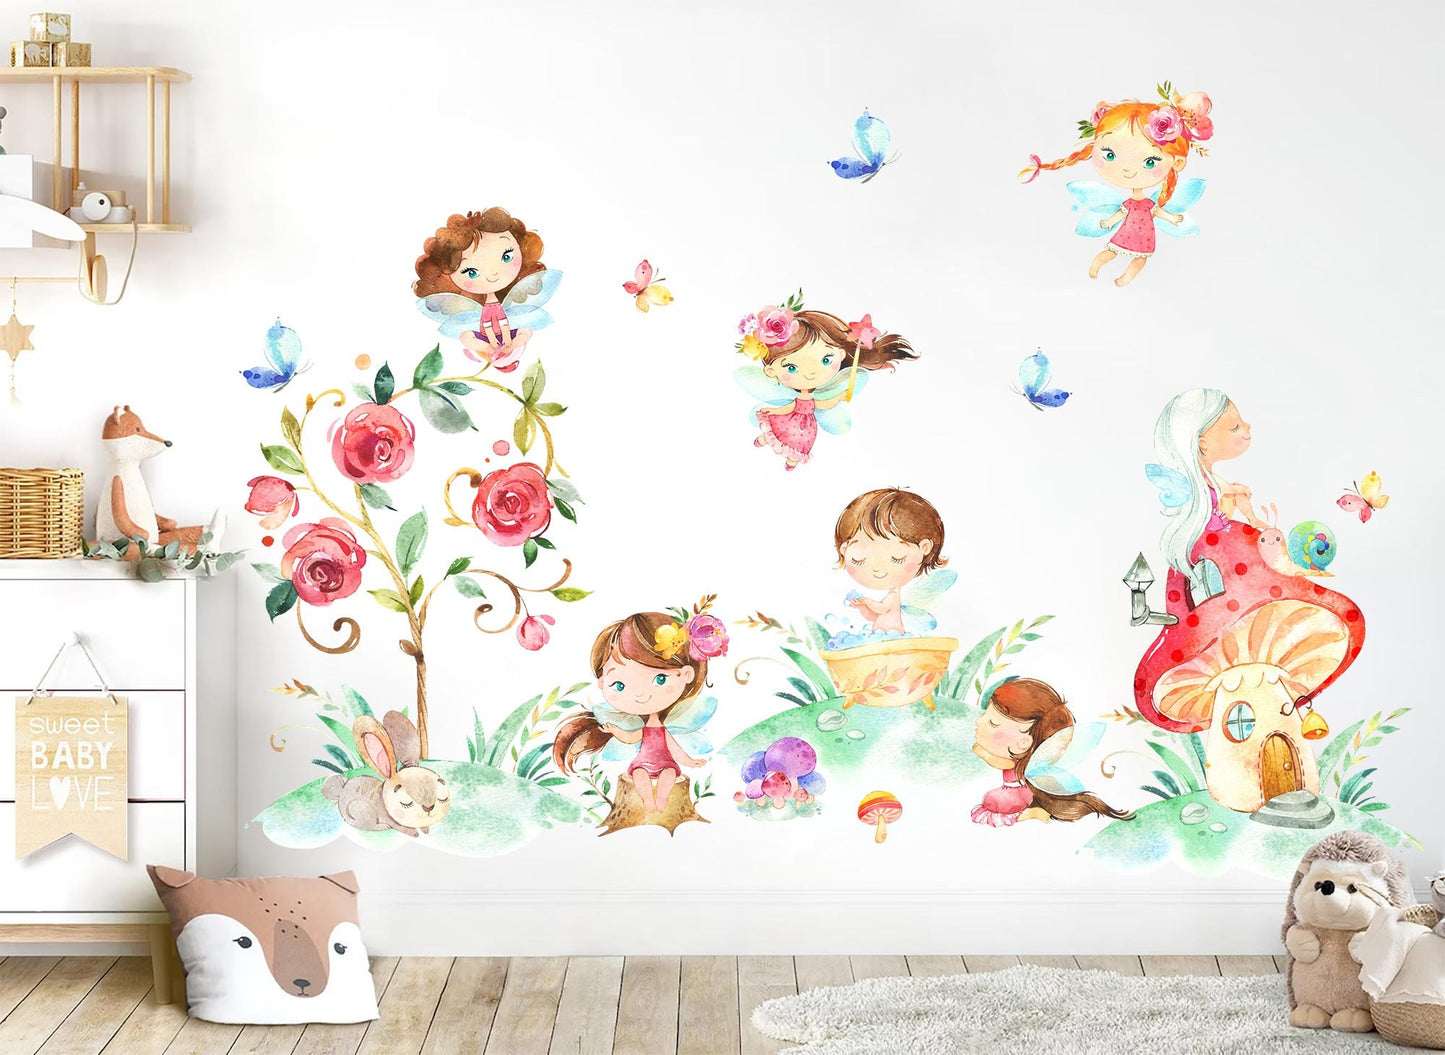 Enchanting Fairy Removable Wall Decal - Winged Fairies Dancing Amidst Flowers - BR327